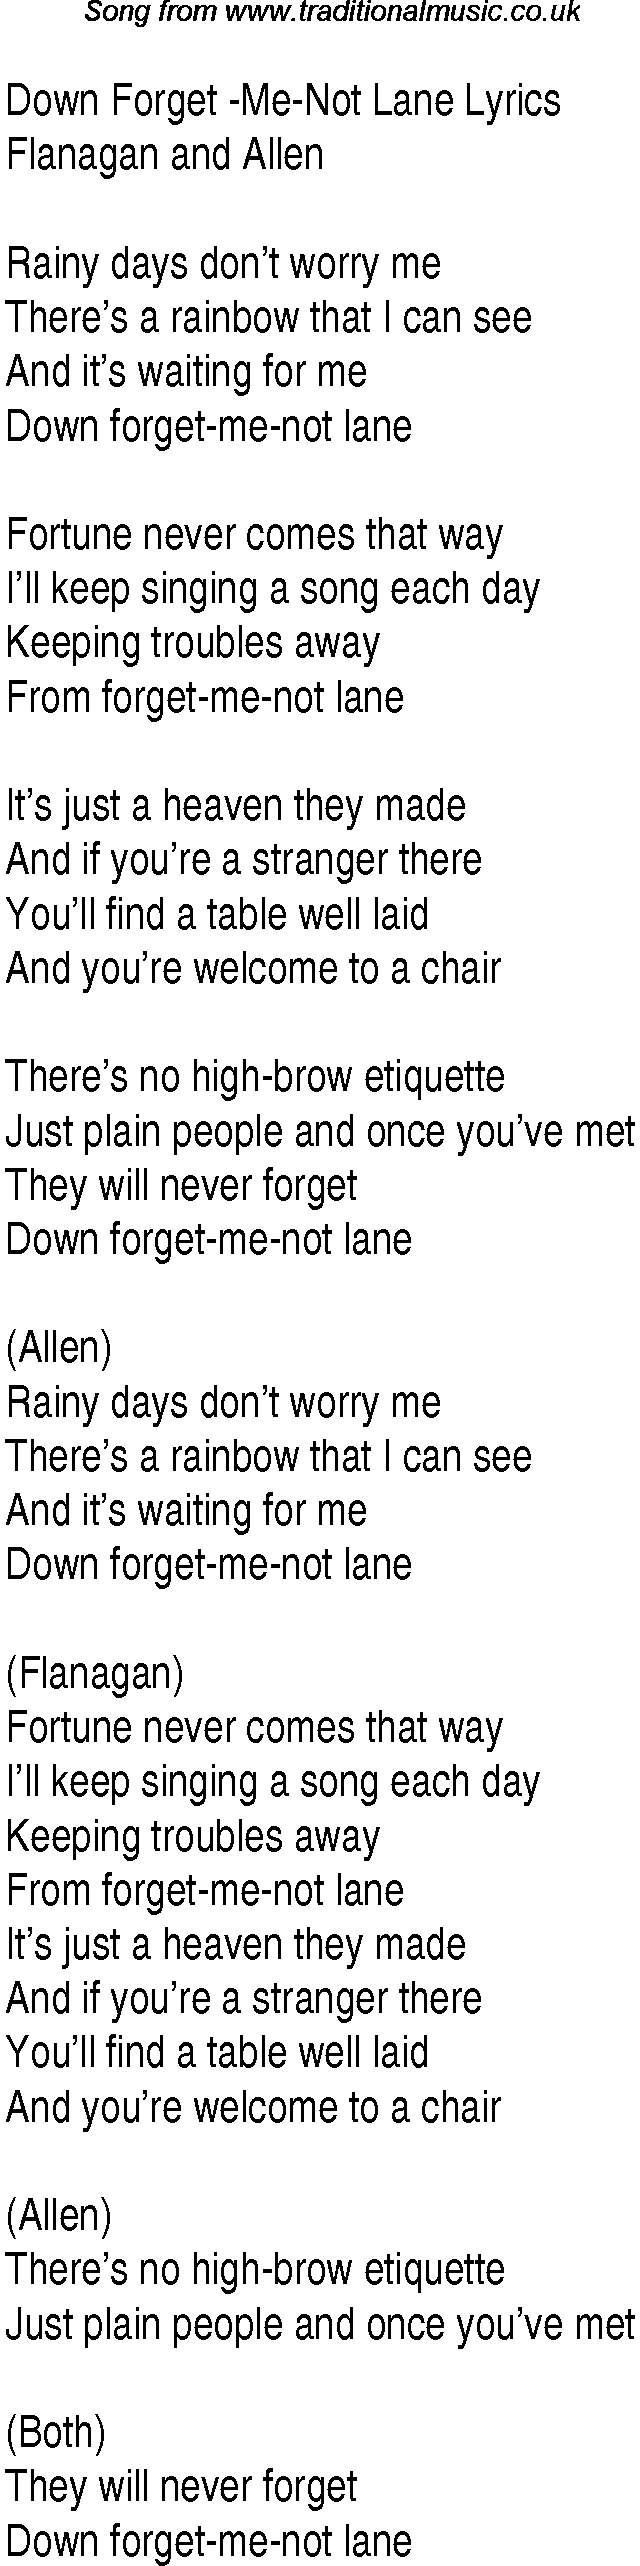 1940s top songs - lyrics for Down Forget  Me Not Lane(Flanagan Allen)